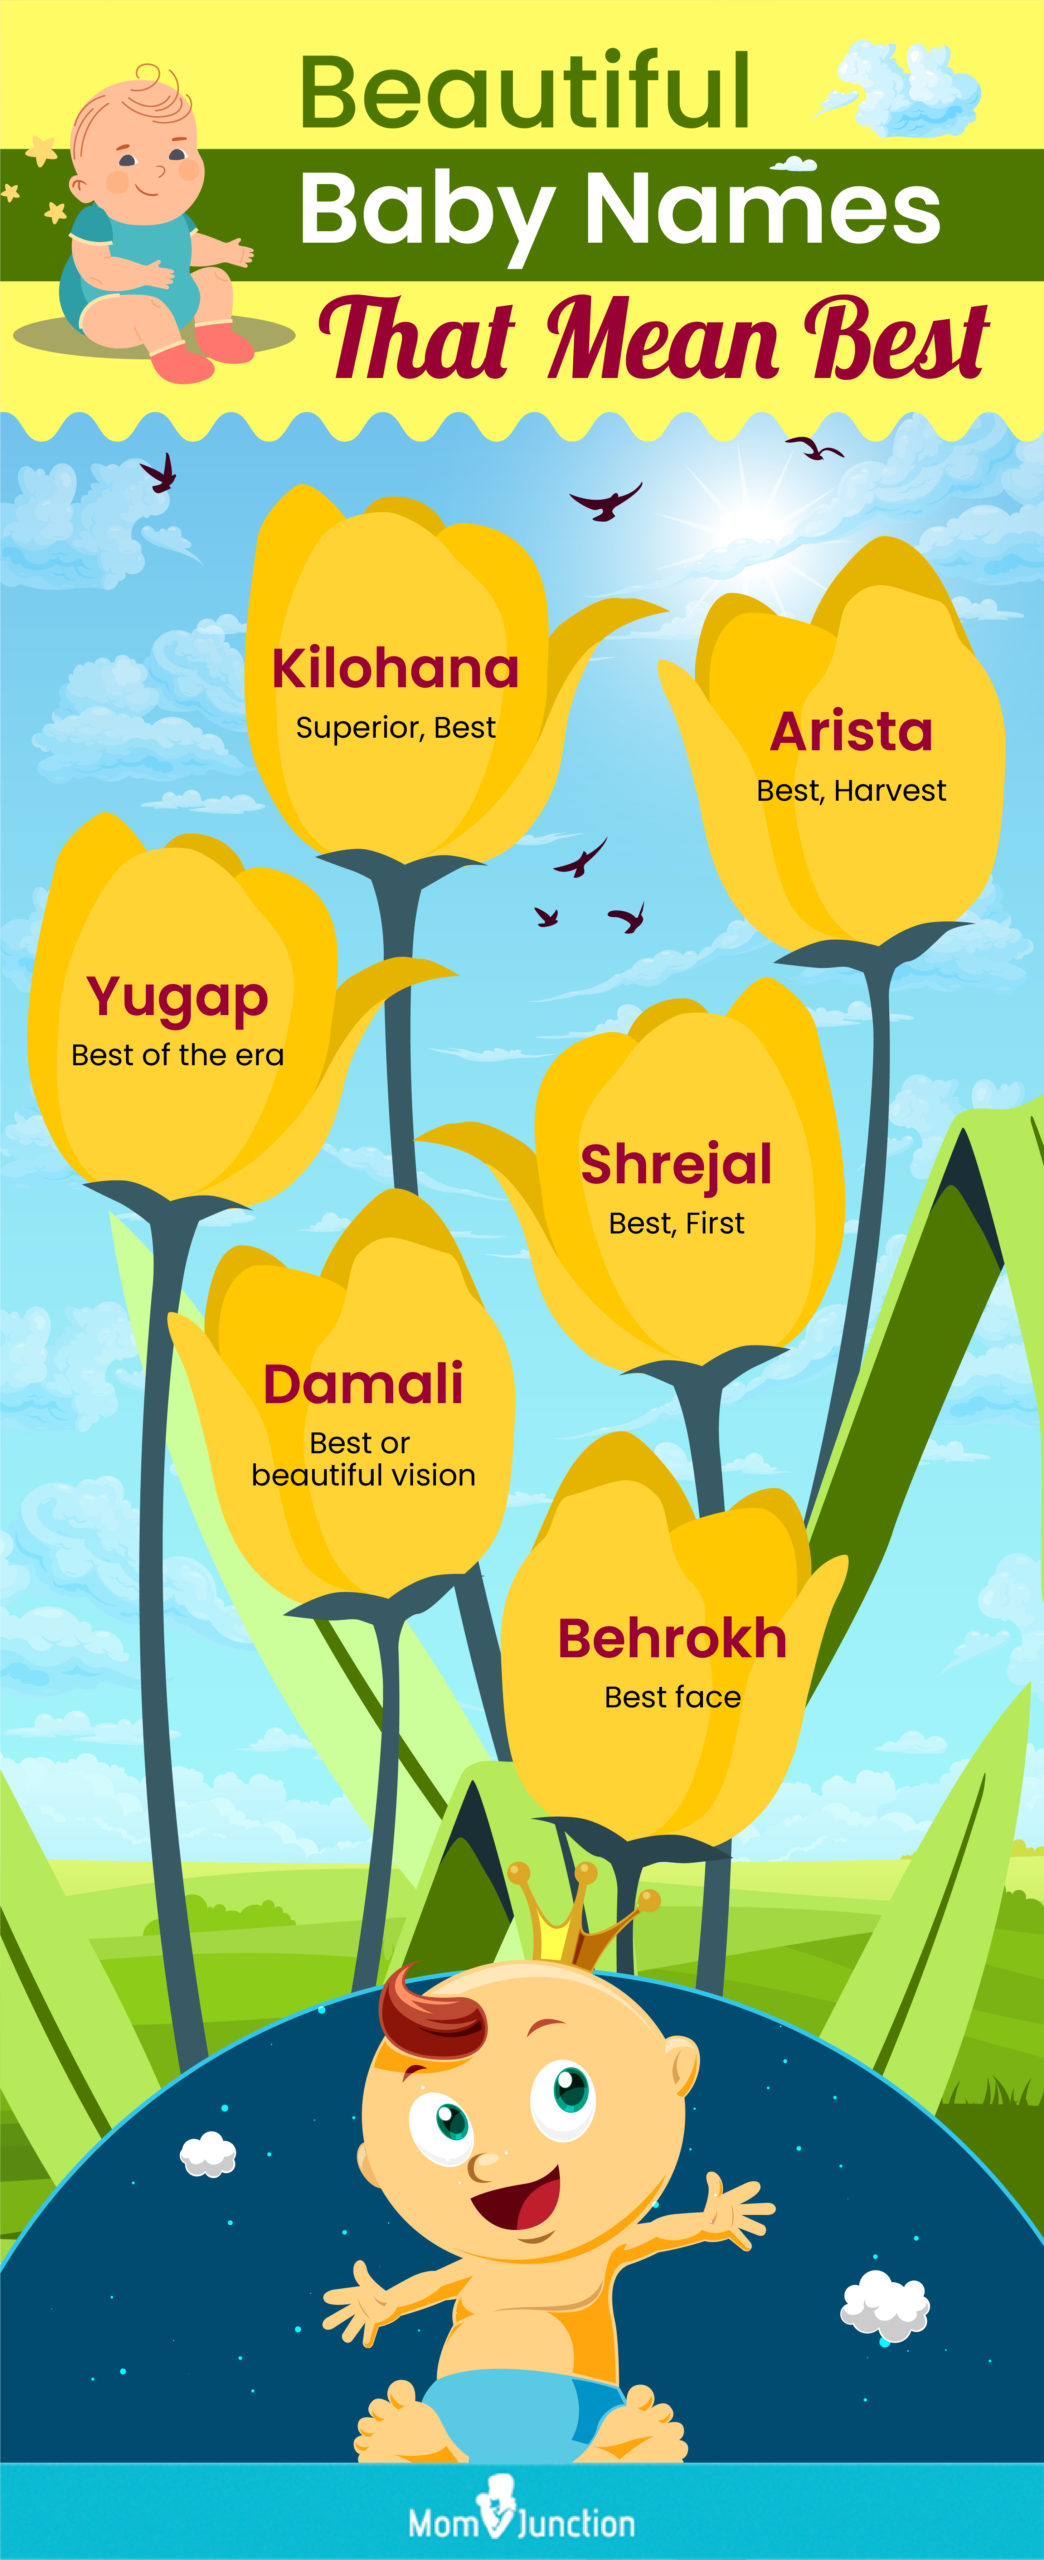 beautiful baby names that mean best (infographic)